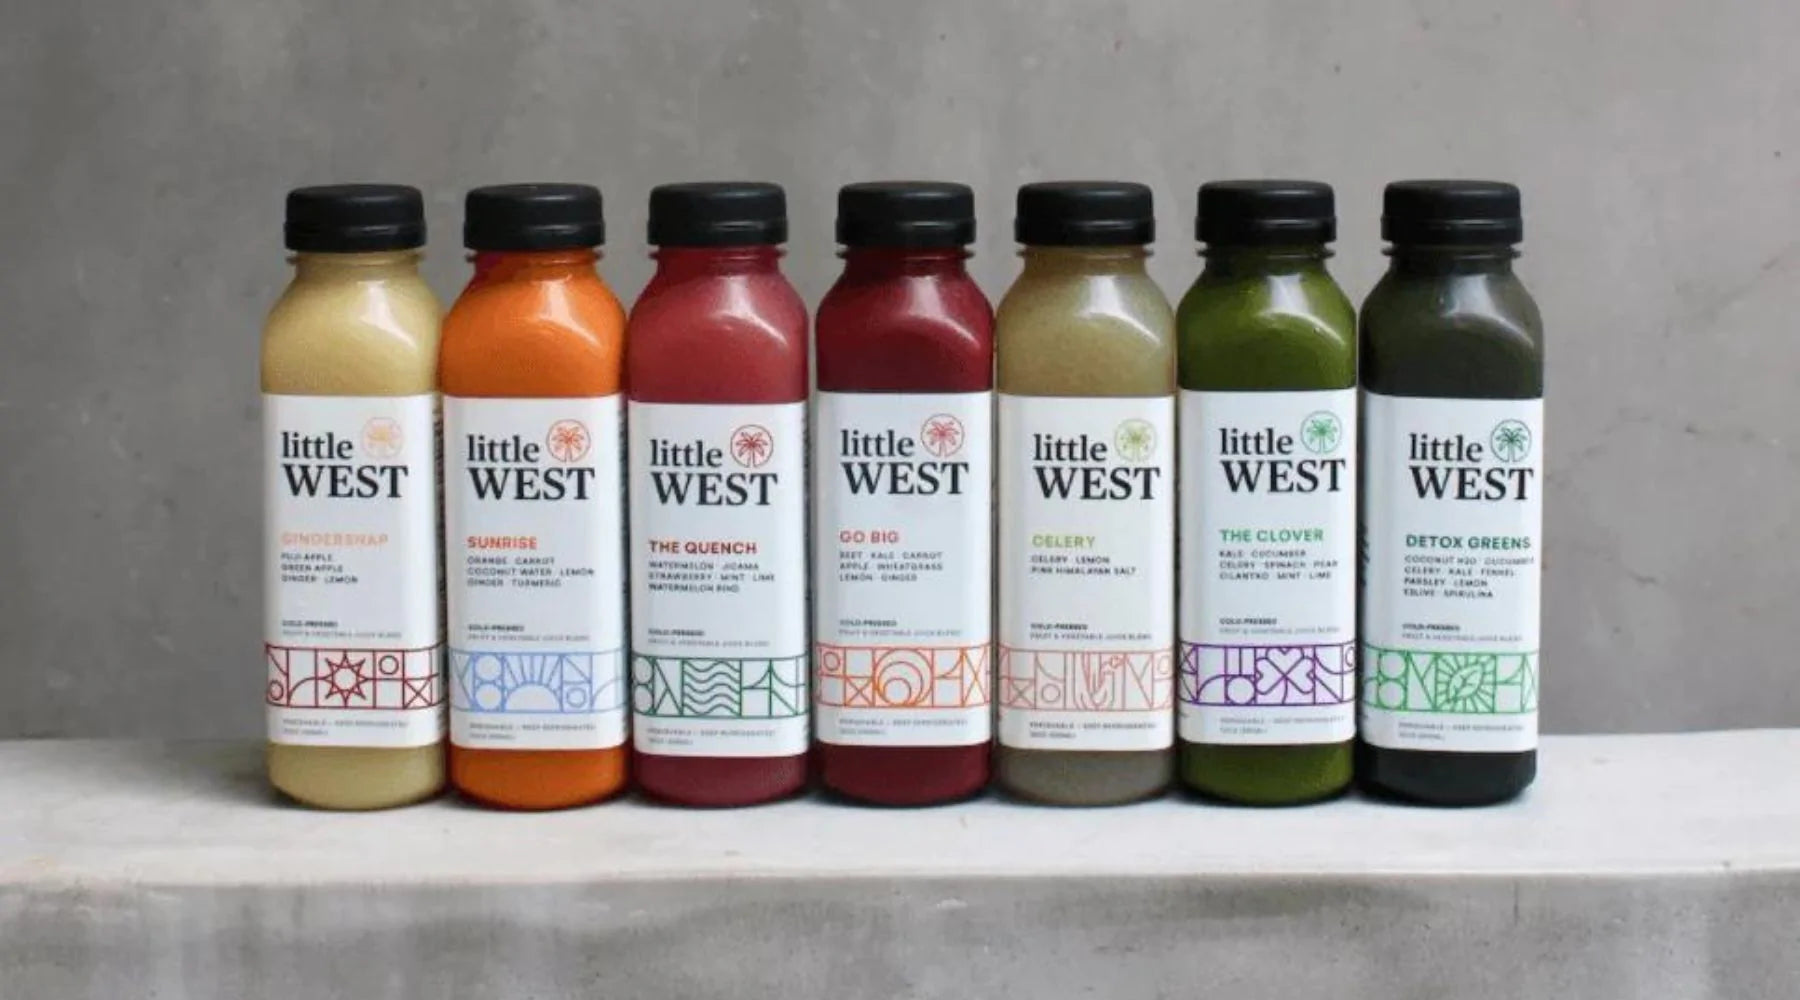 How To Do a New Year's Juice Cleanse